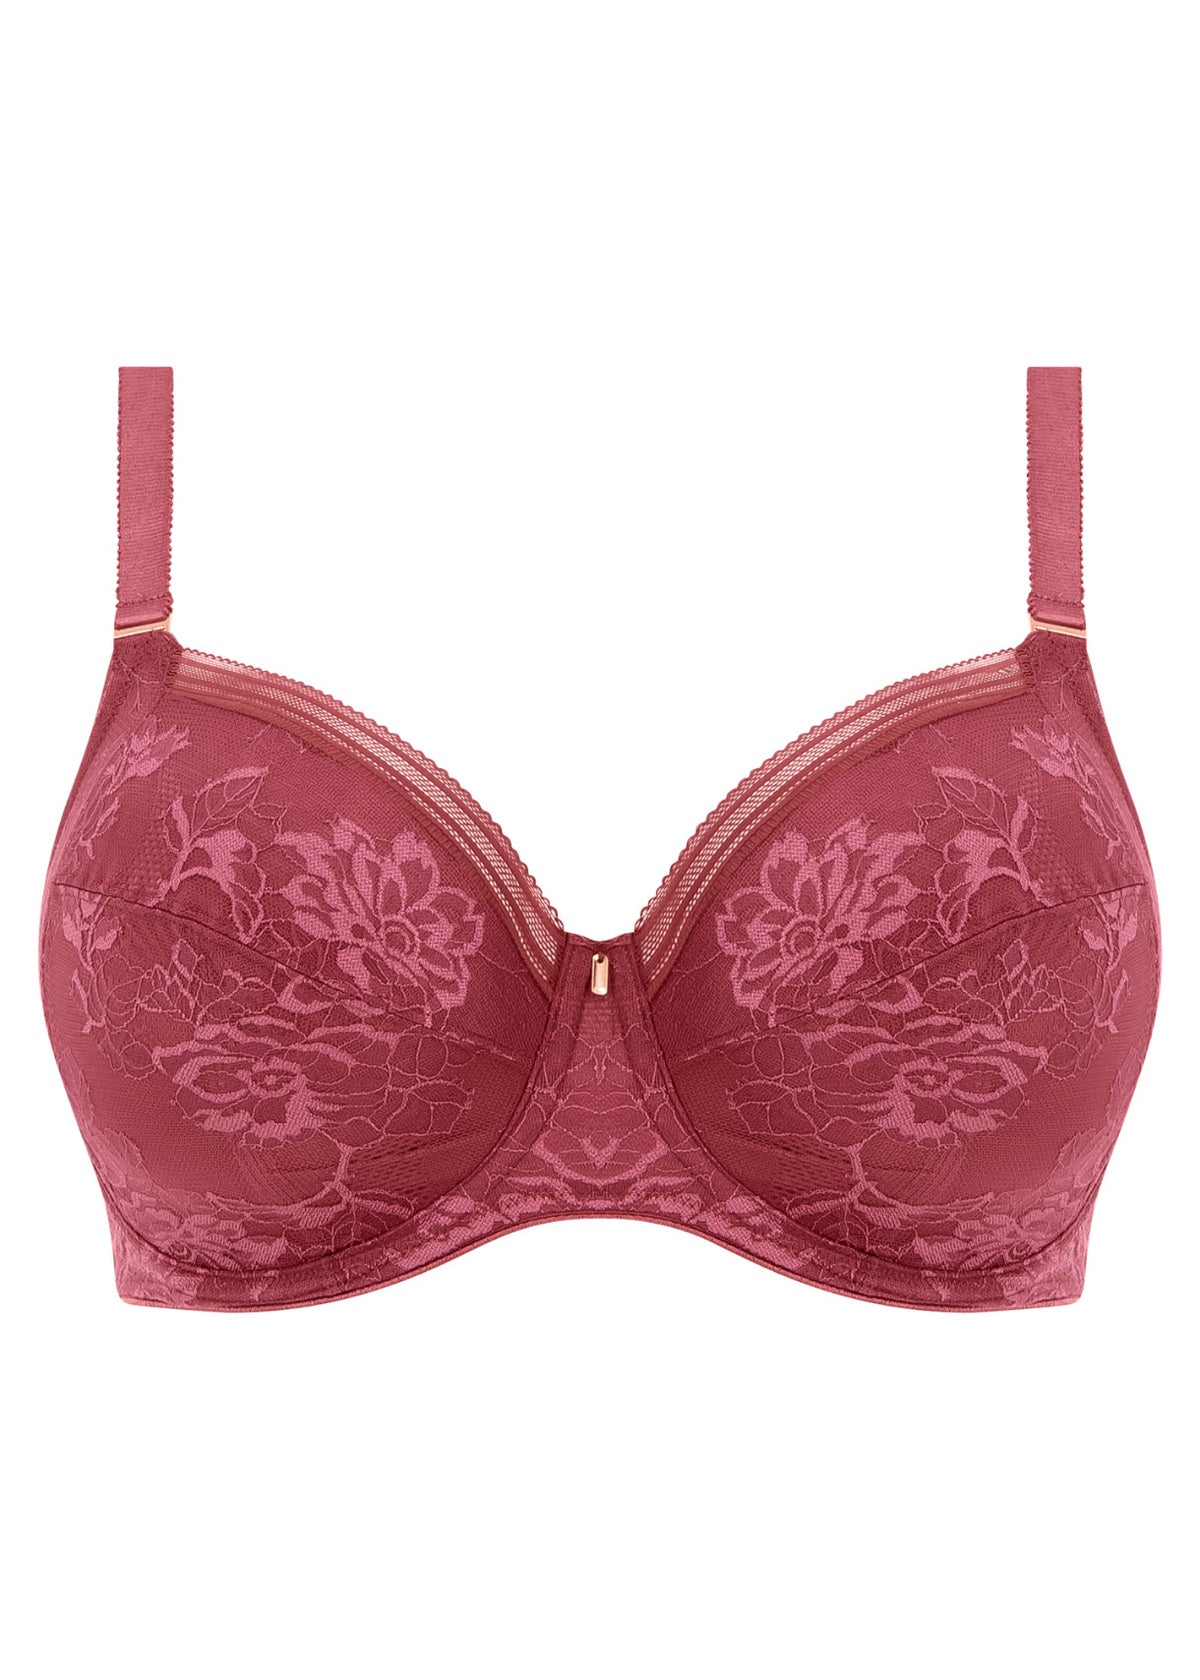 Fantasie Fusion Lace Full Cup Side Support Bra - Rosewood